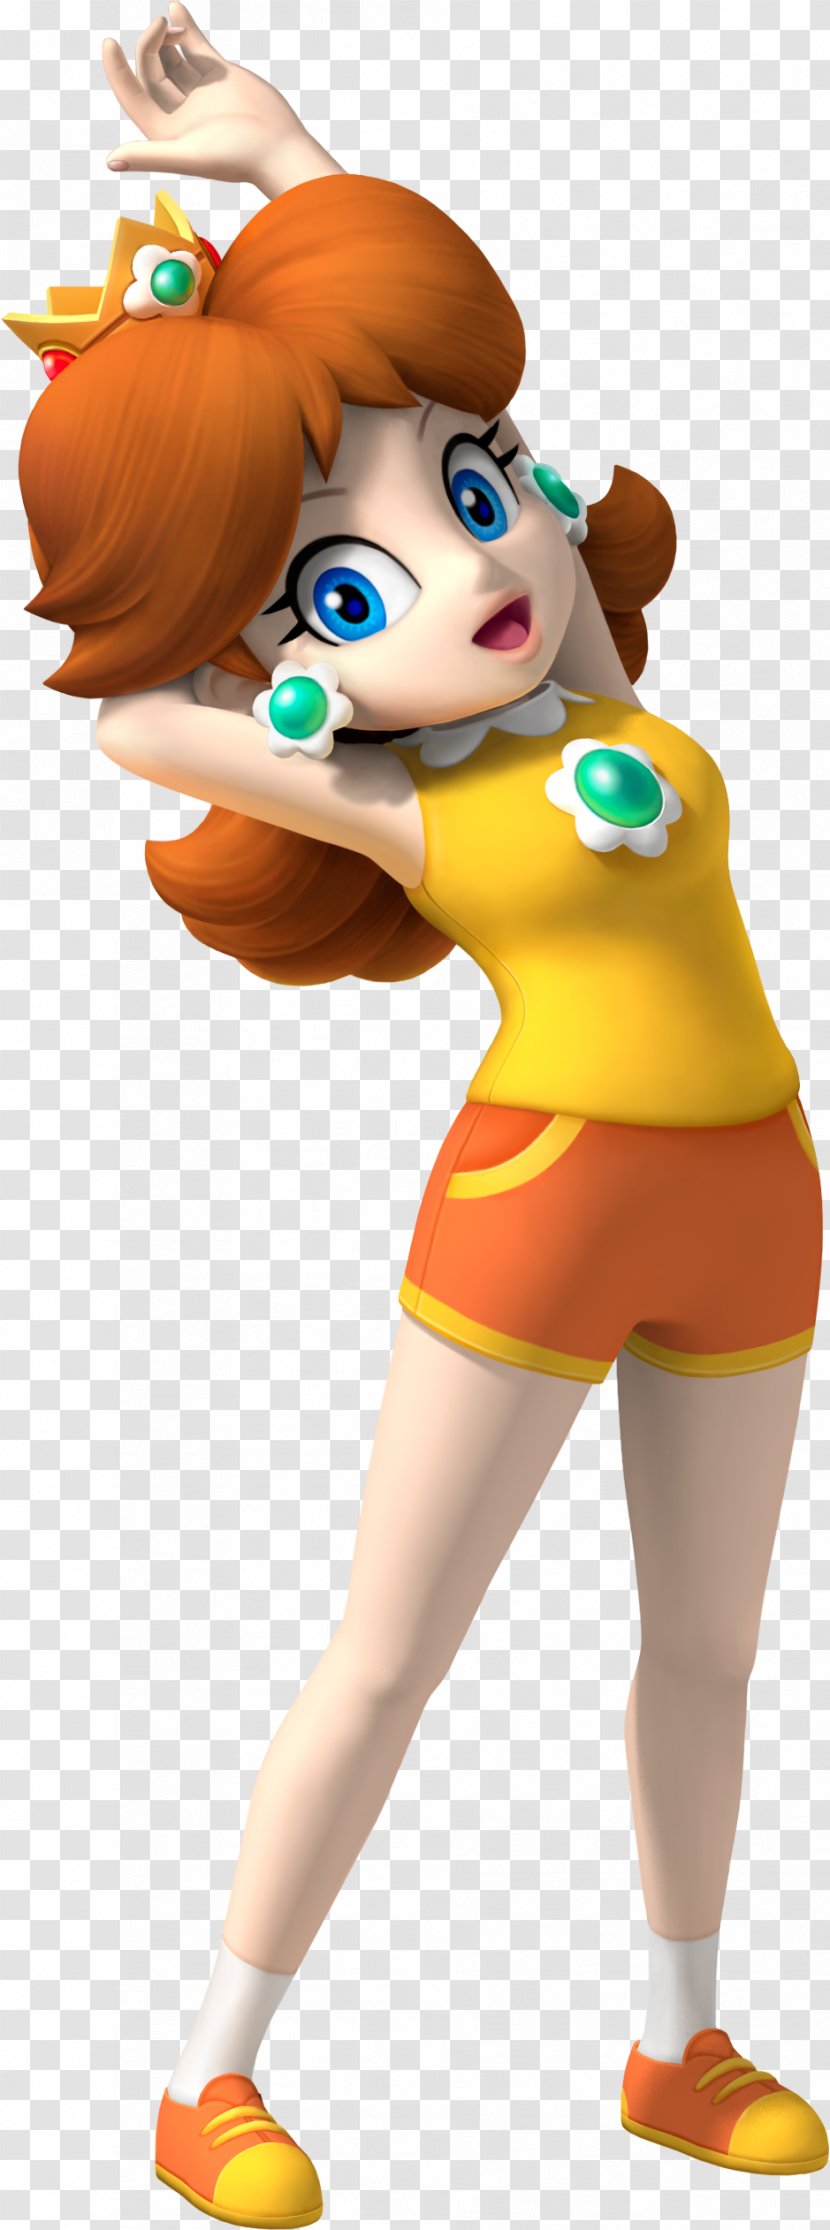 Princess Daisy Peach Mario & Sonic At The Olympic Games Super Land - Yellow Transparent PNG